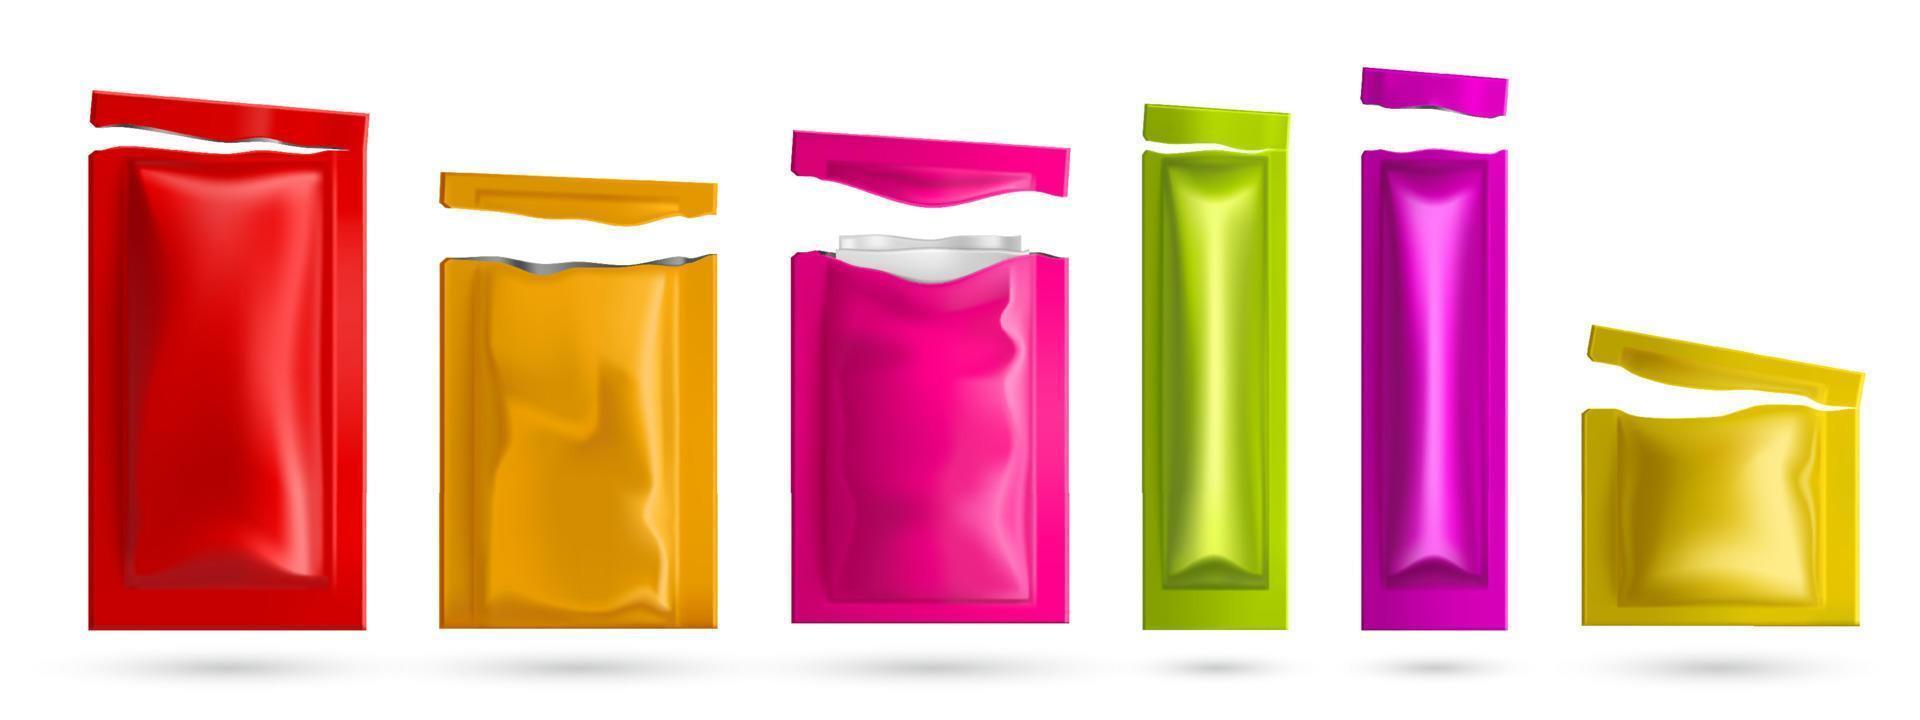 Torn colored sachets with wet wipes vector